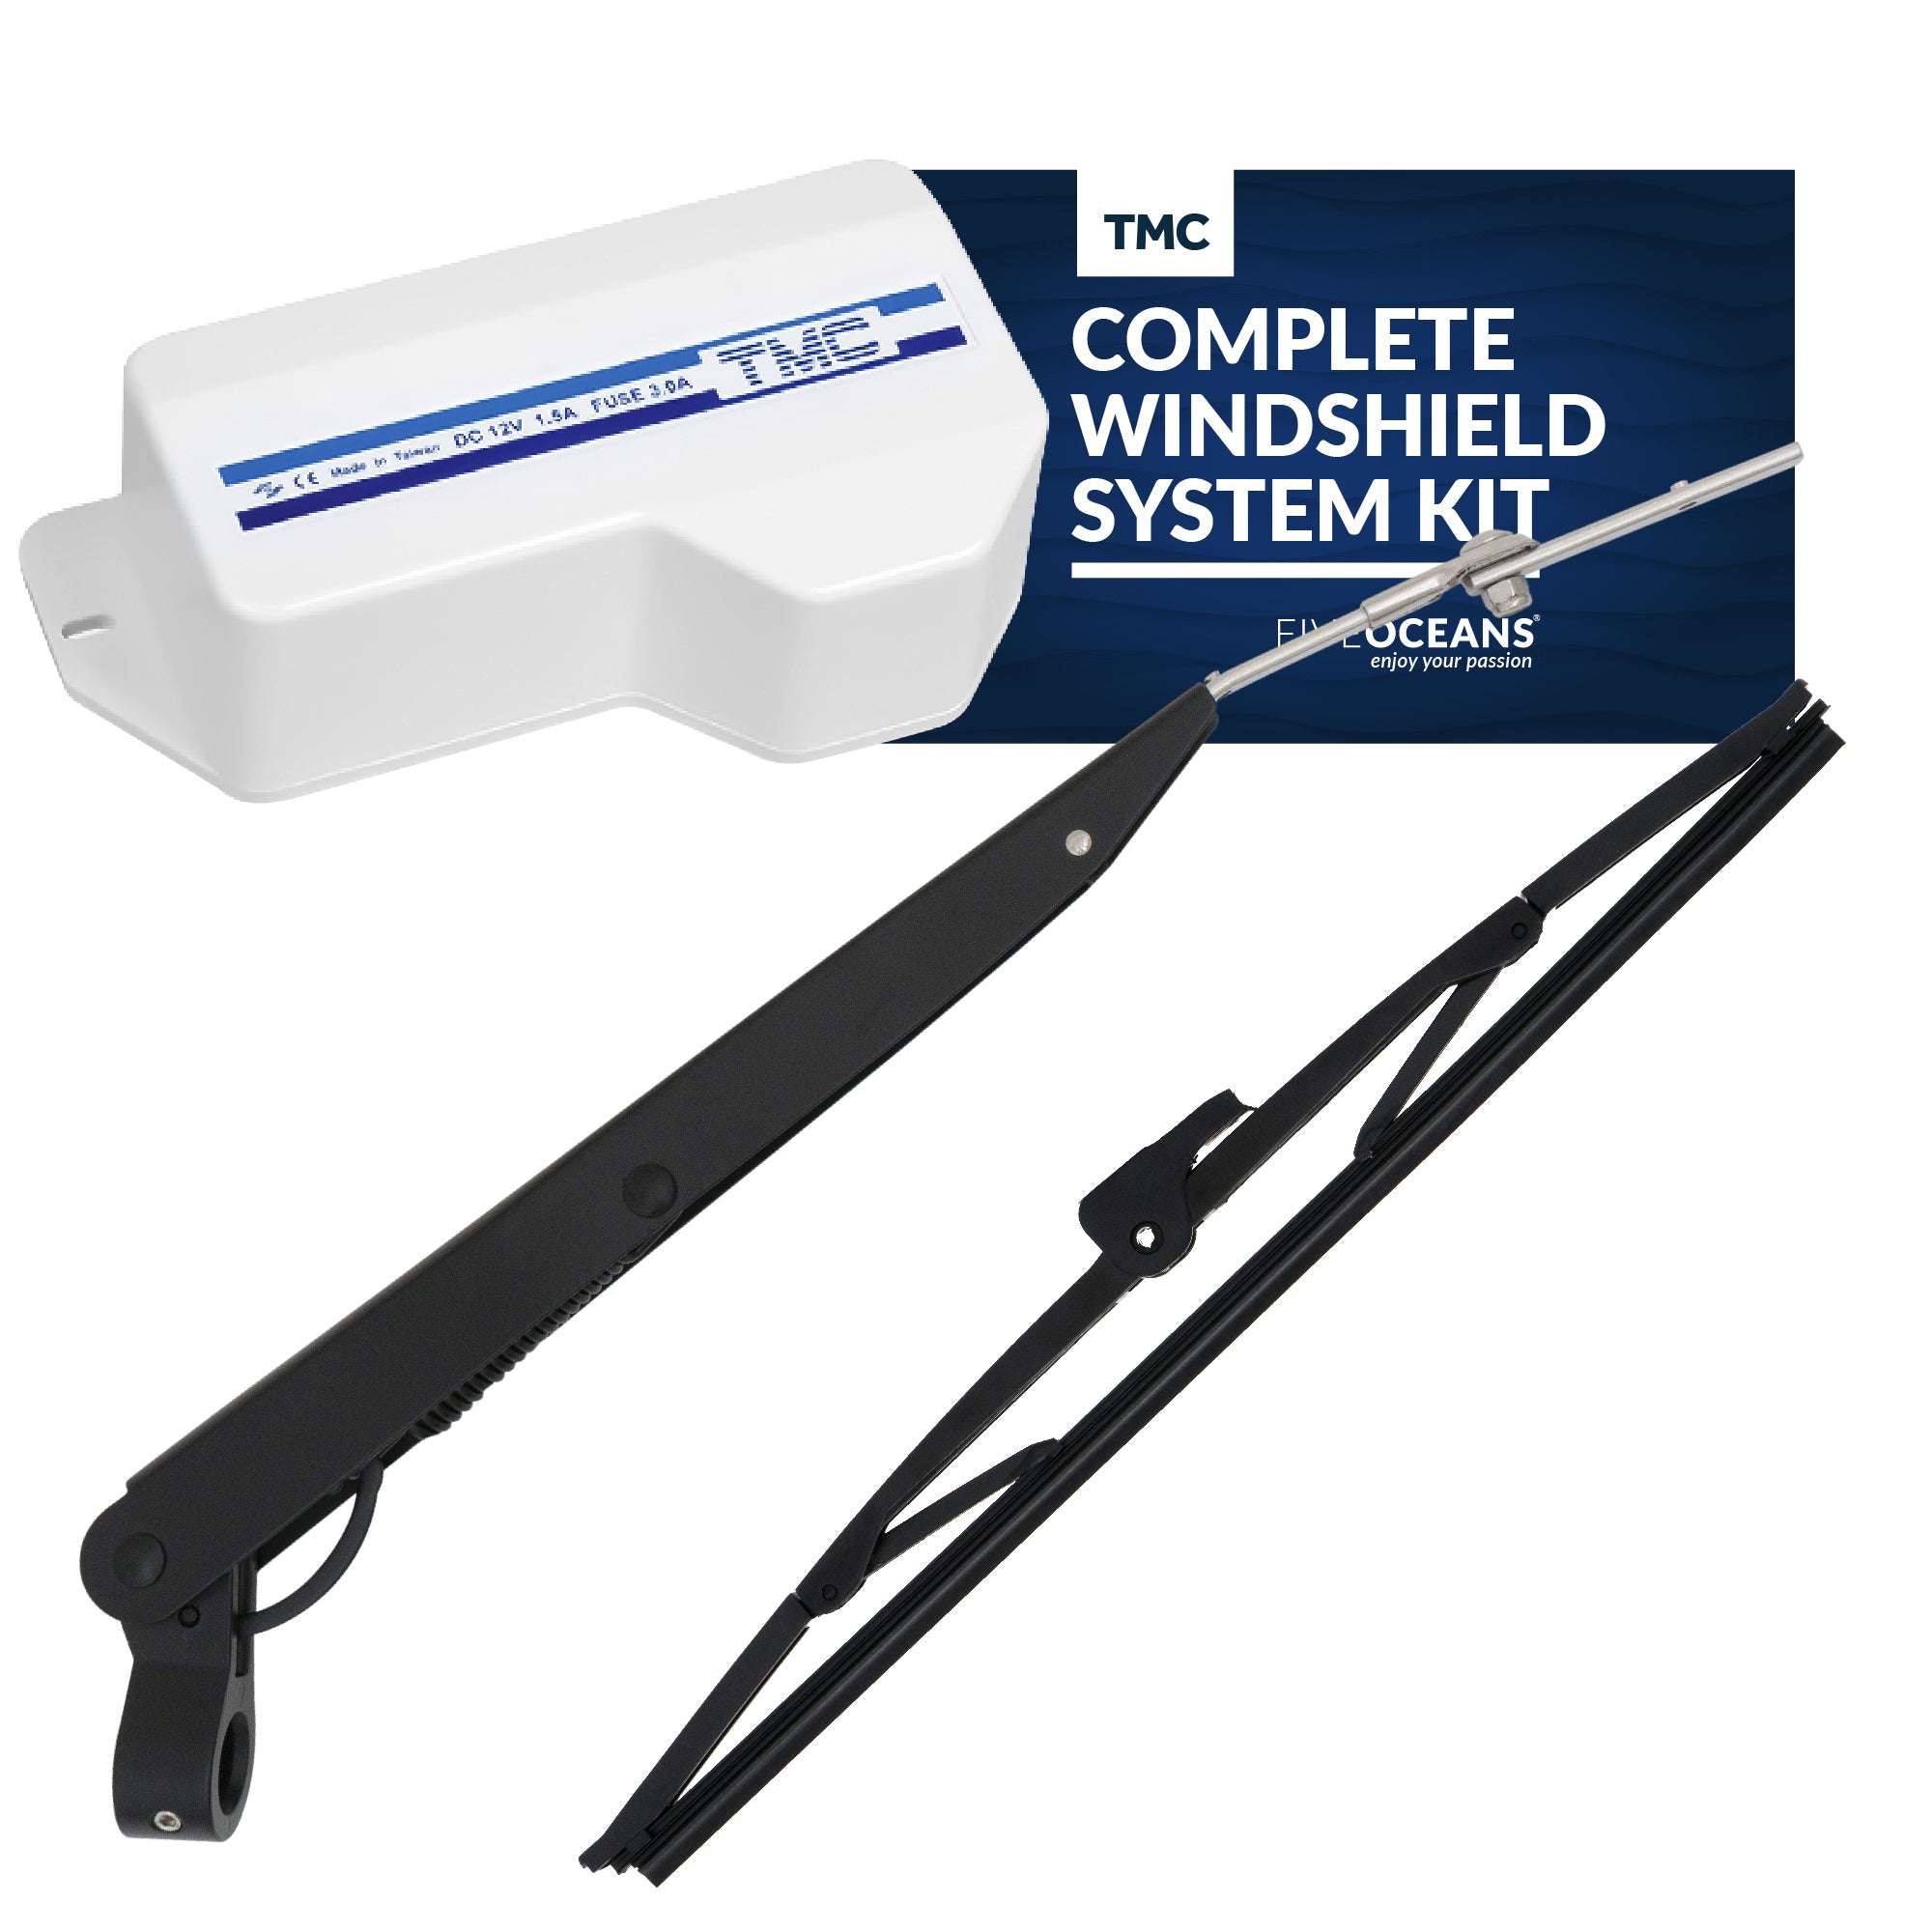 TMC Complete Windshield System Kit  - FO746-C3